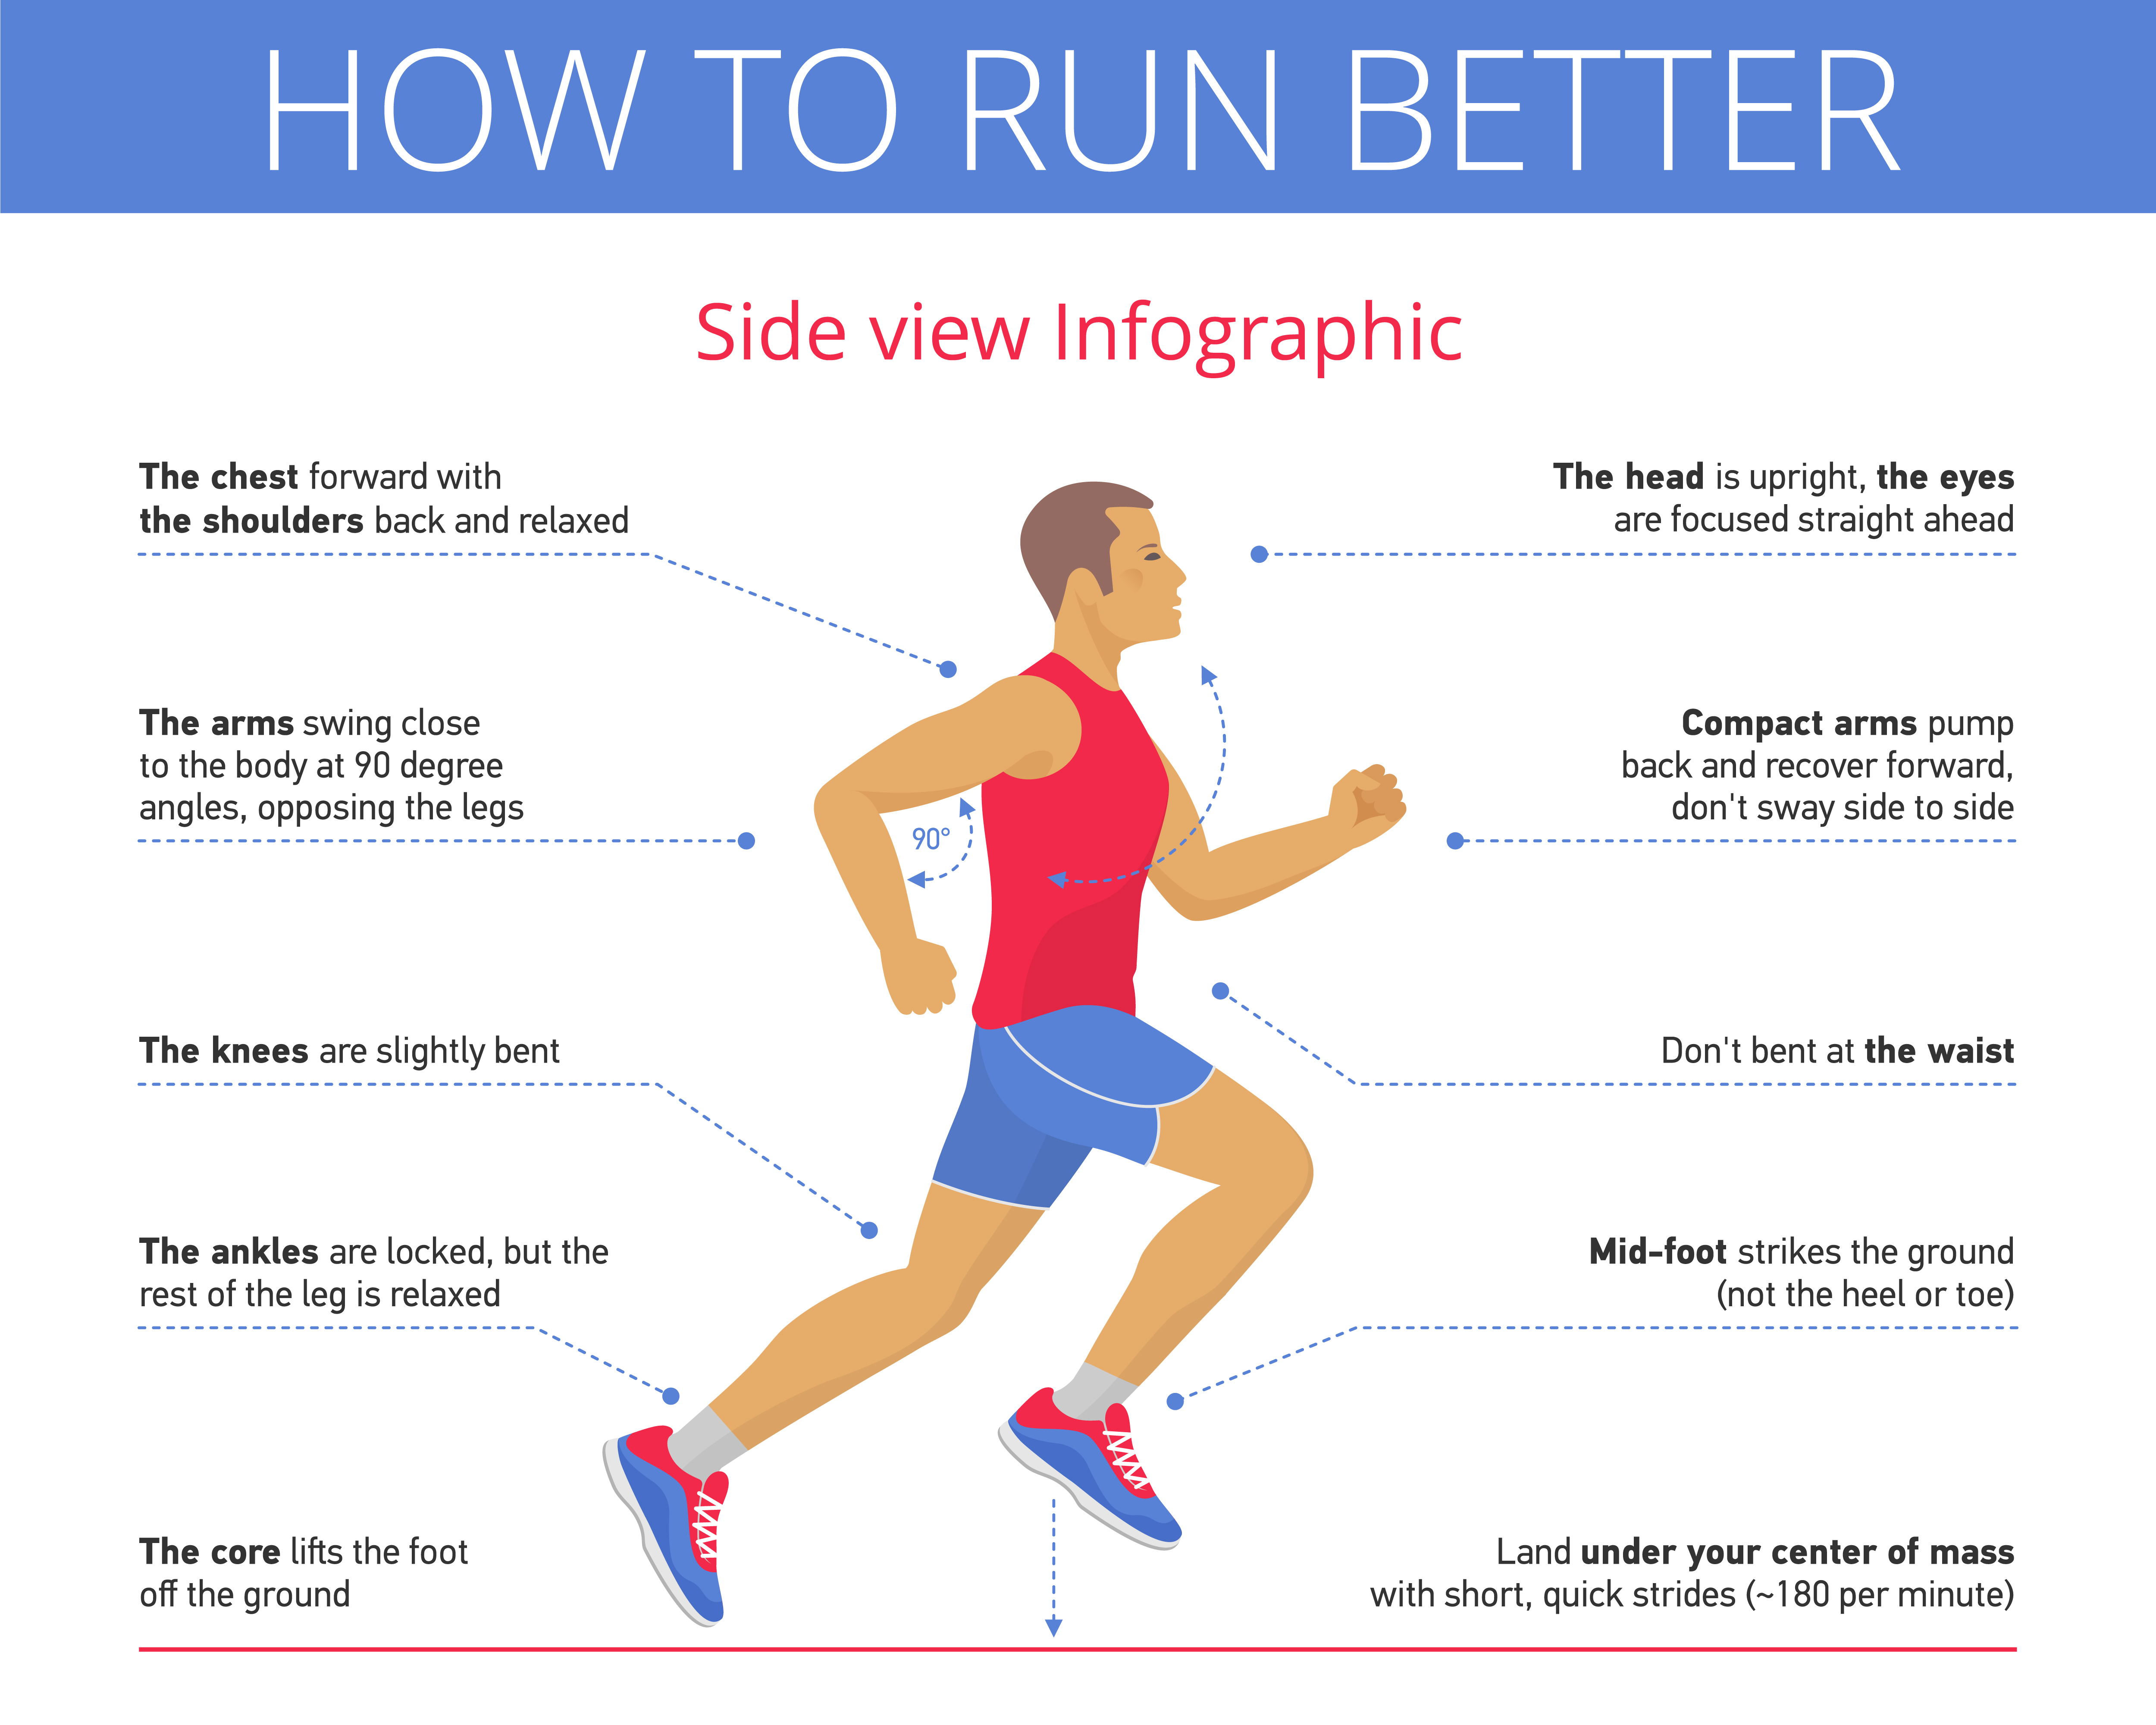 Infographic demonstrating how to run better